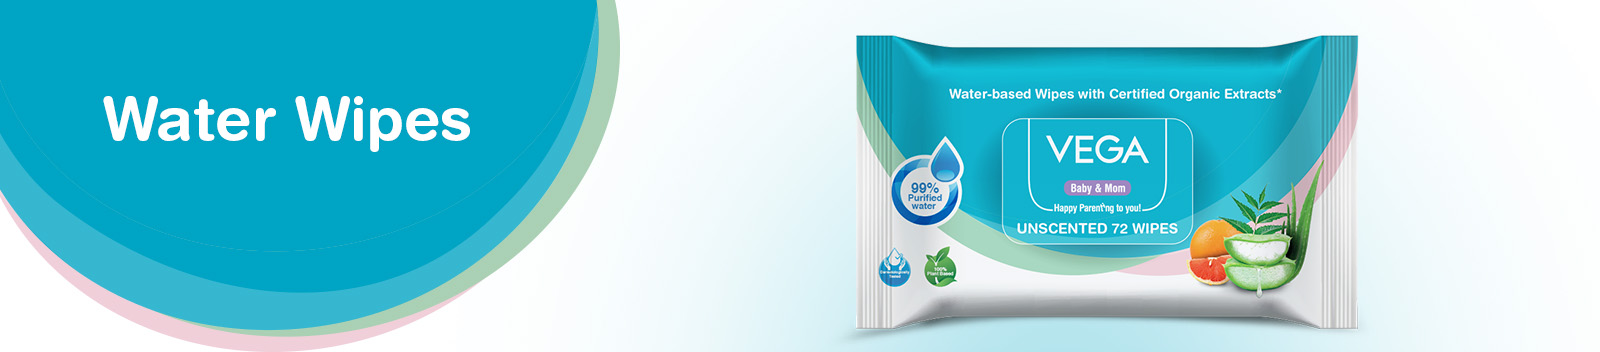 Wipes, Baby Wipes, 99.9% Pure Water Wipes (72 Wipes)